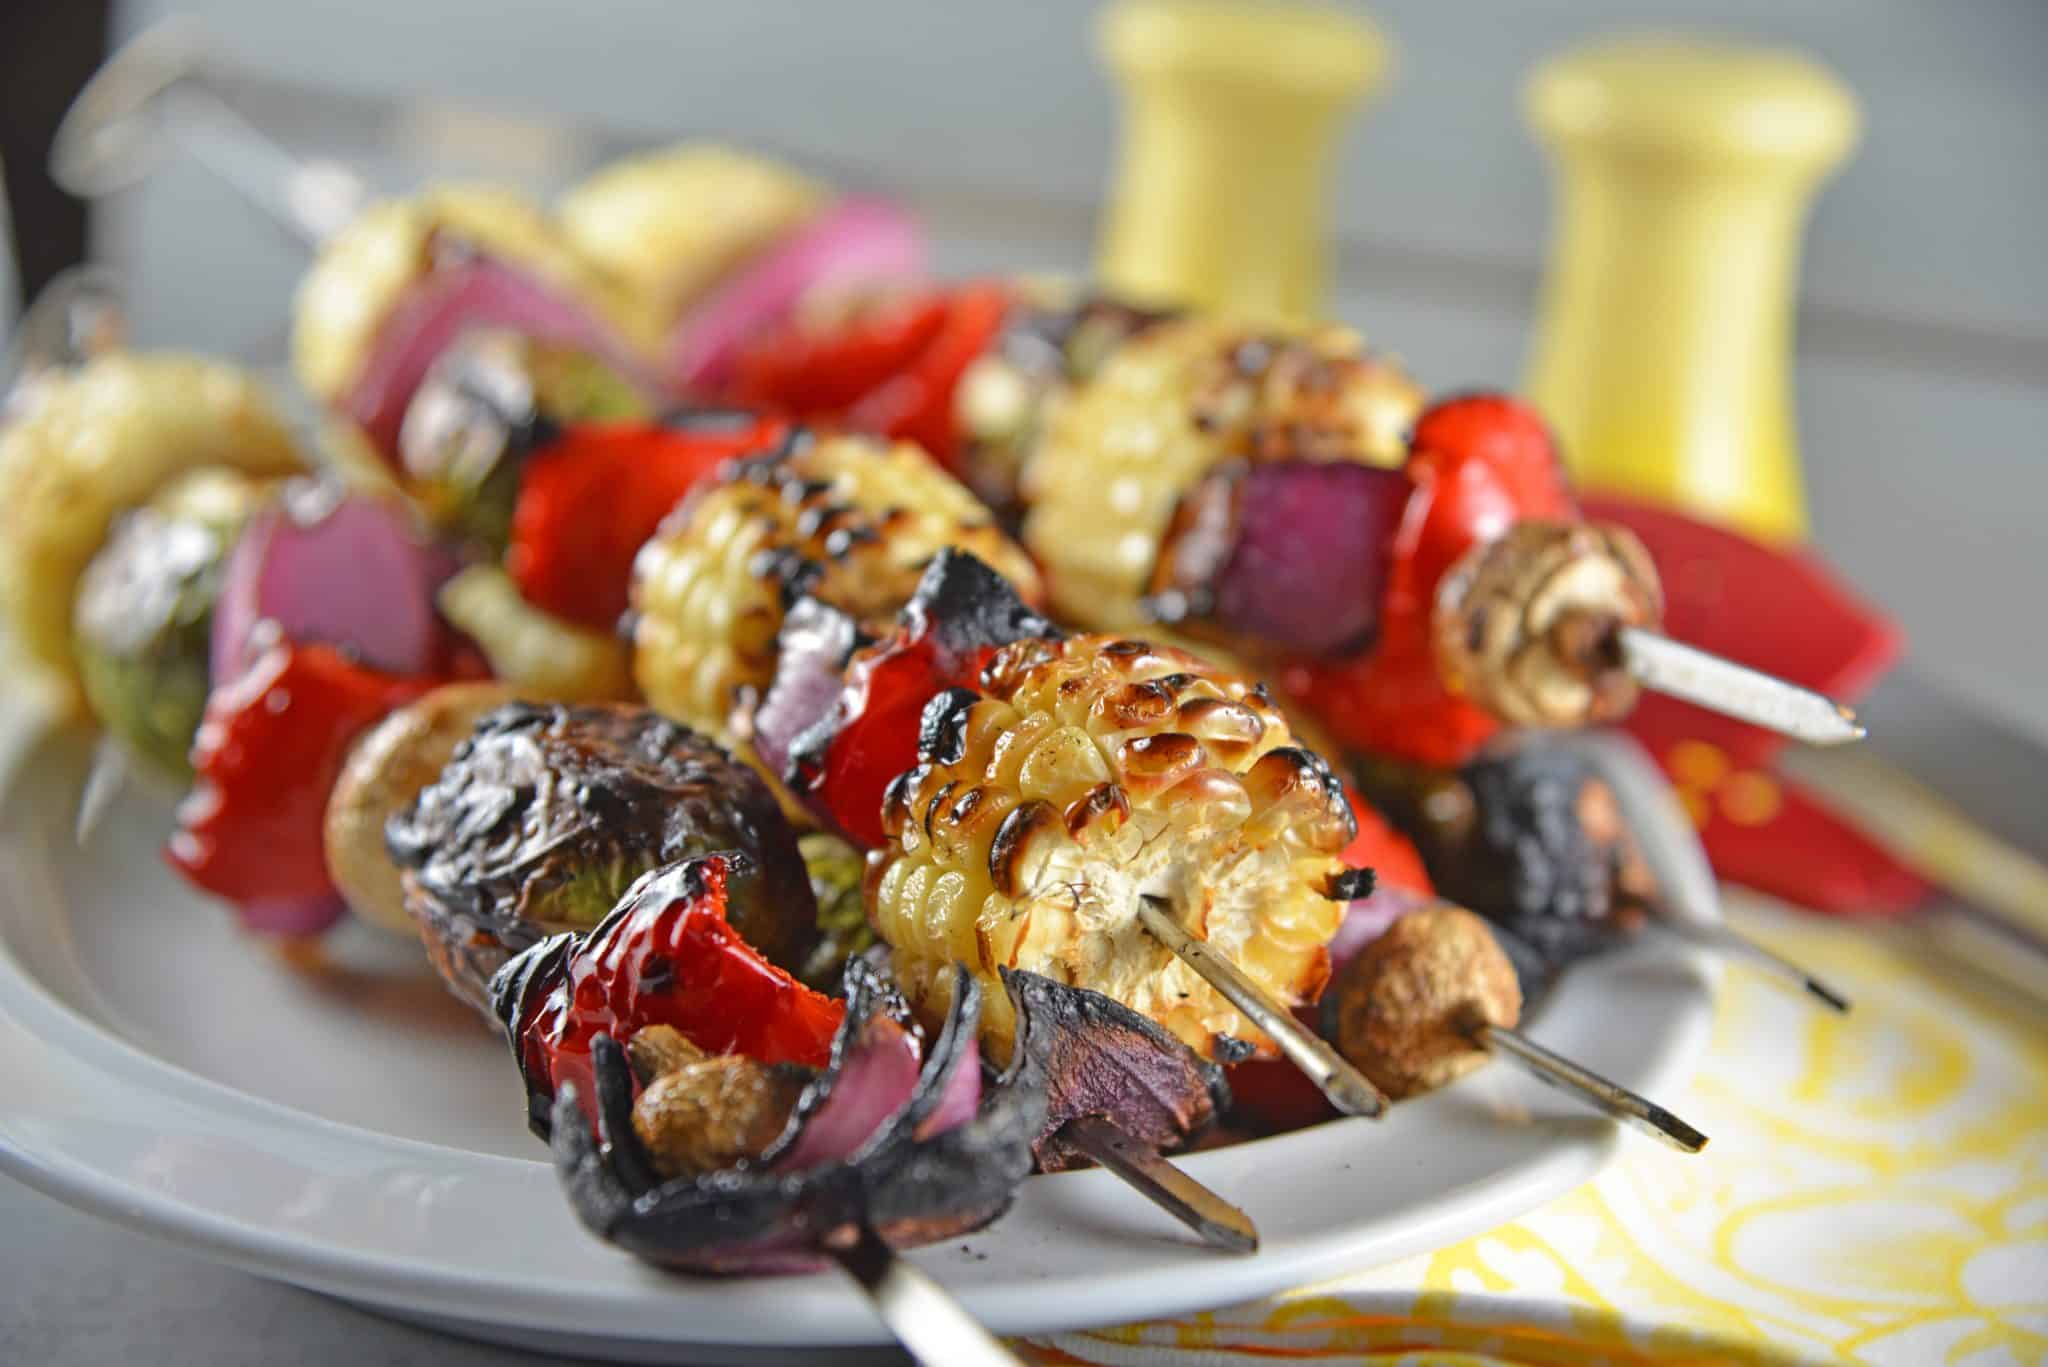 Spicy Honey Vegetable Kabobs are brightly colored skewered grilled vegetables with a sweet and spicy sauce. The perfect side dish for any grilled meal!